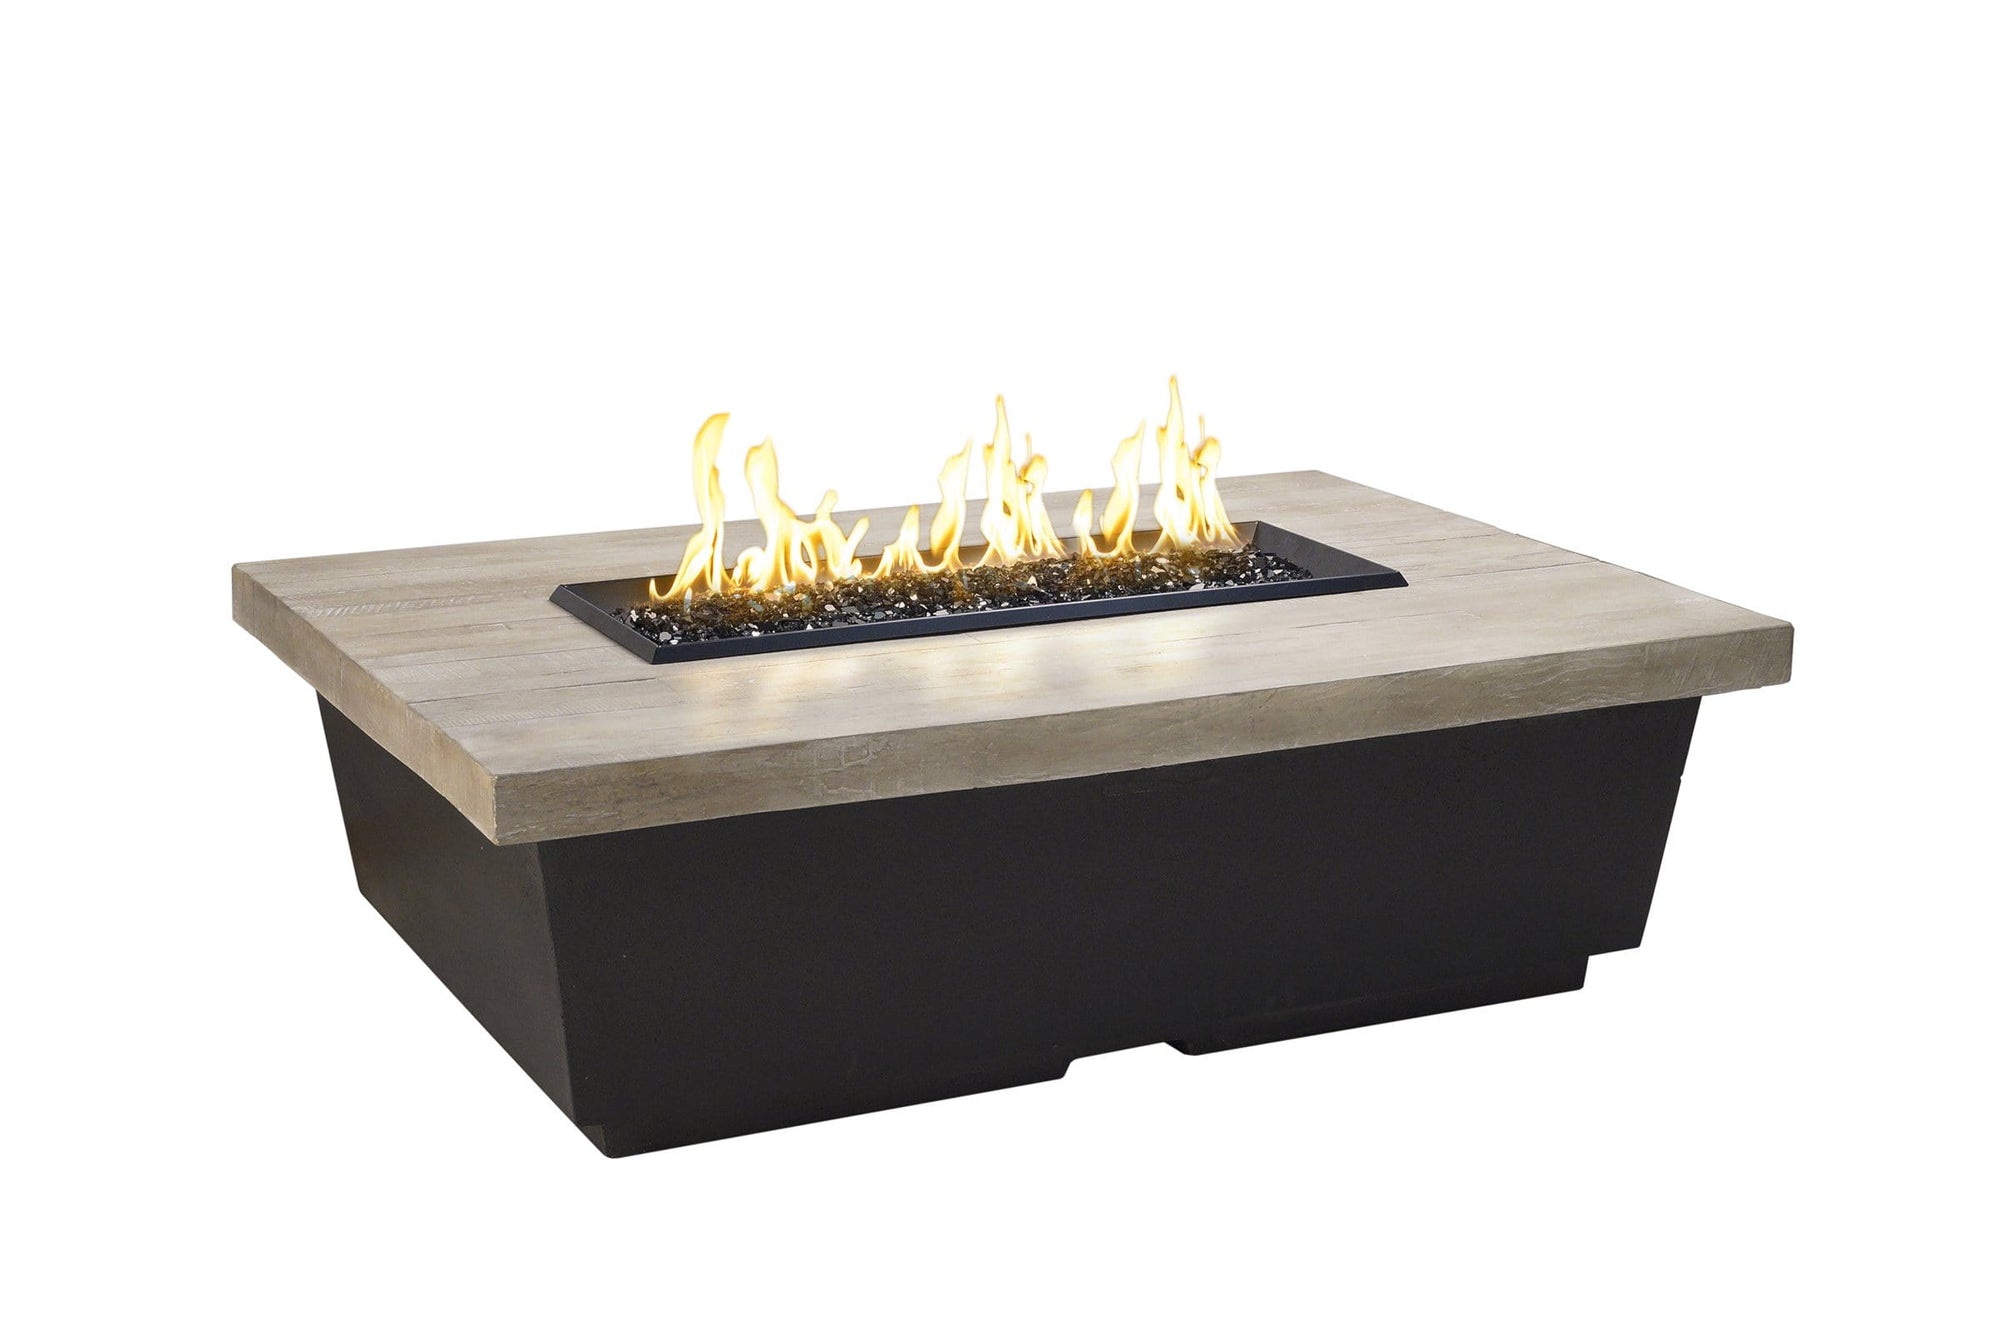 American Fyre Designs Fire Features Silver Pine / Natural Gas / Manual Ignition System American Fyre Designs 54" Reclaimed Wood Contempo Rectangle Gas Firetable / French Barrel Oak or Silver Pine Finish / 783-BA-FO-M4NC, 783-BA-FO-M4PC, 783-BA-SP-M4NC, 783-BA-SP-M4PC, 783-BA-FO-F4NC, 783-BA-FO-F4PC,  783-BA-SP-F4NC, or 783-BA-SP-F4PC